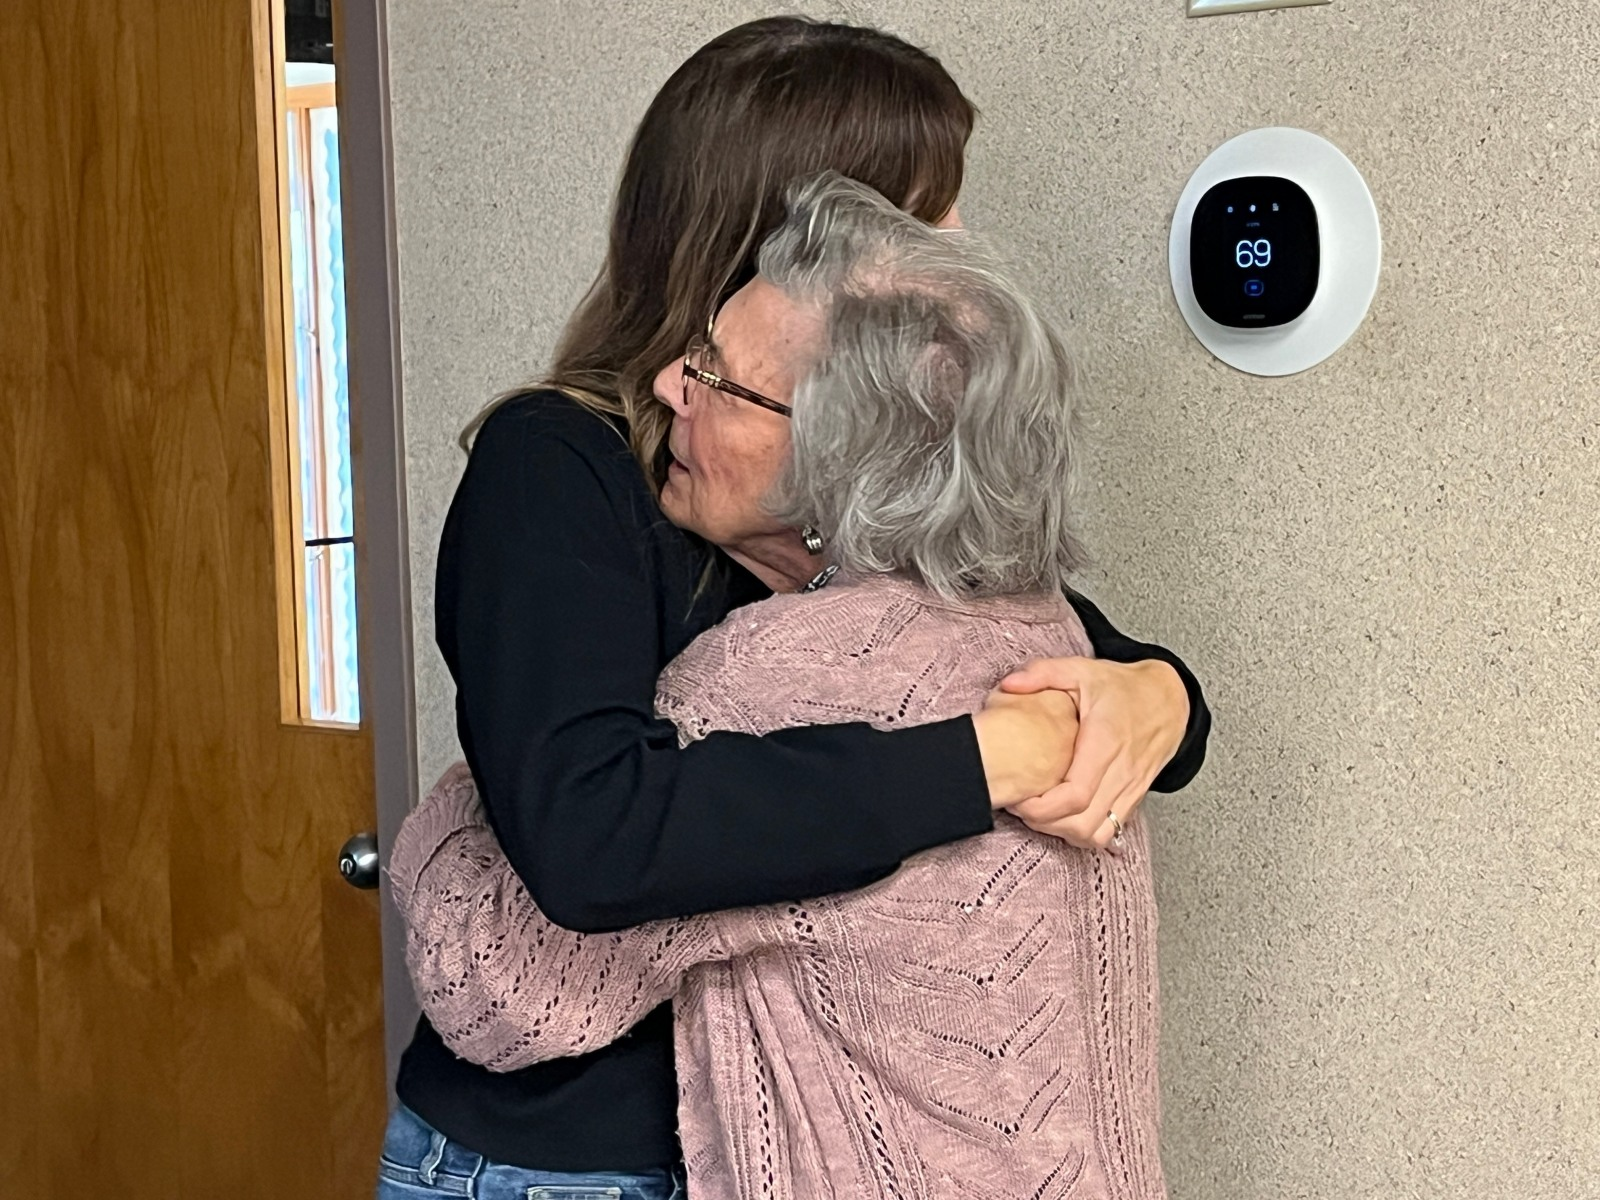 Two women give each other a hug in a church hallway